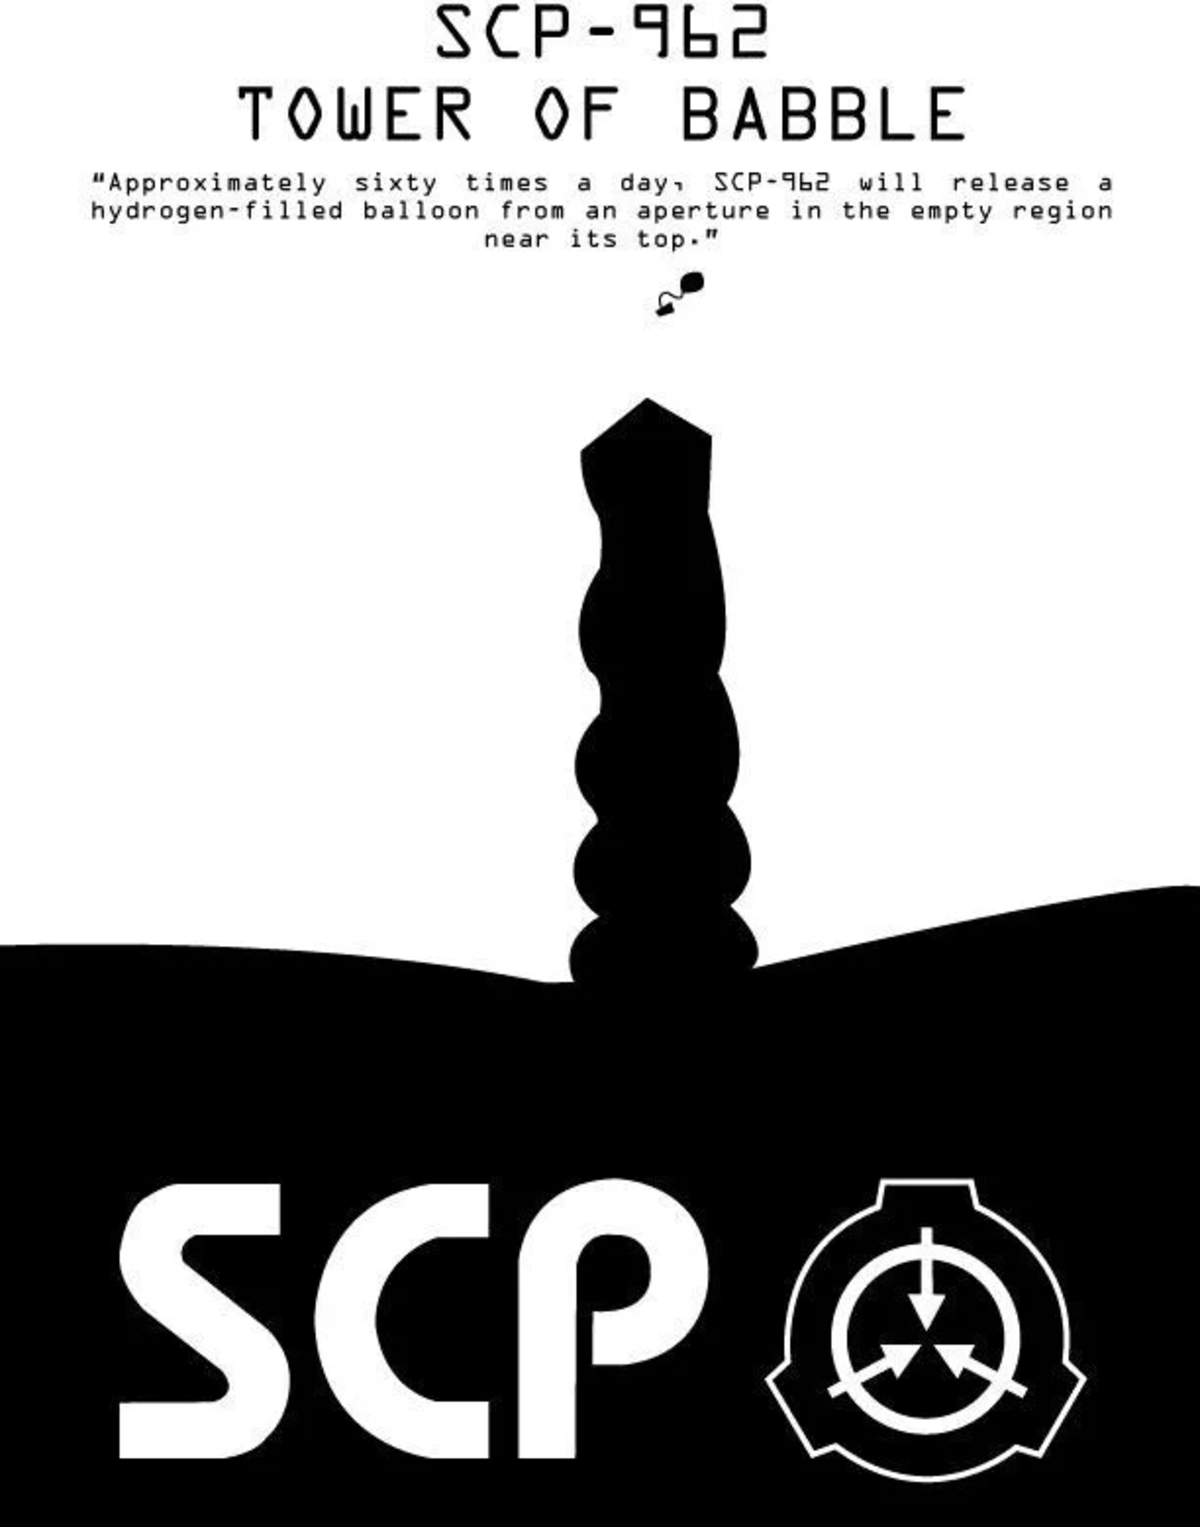 SCP-962 Tower of Babble, animal, metal, steel, video recording